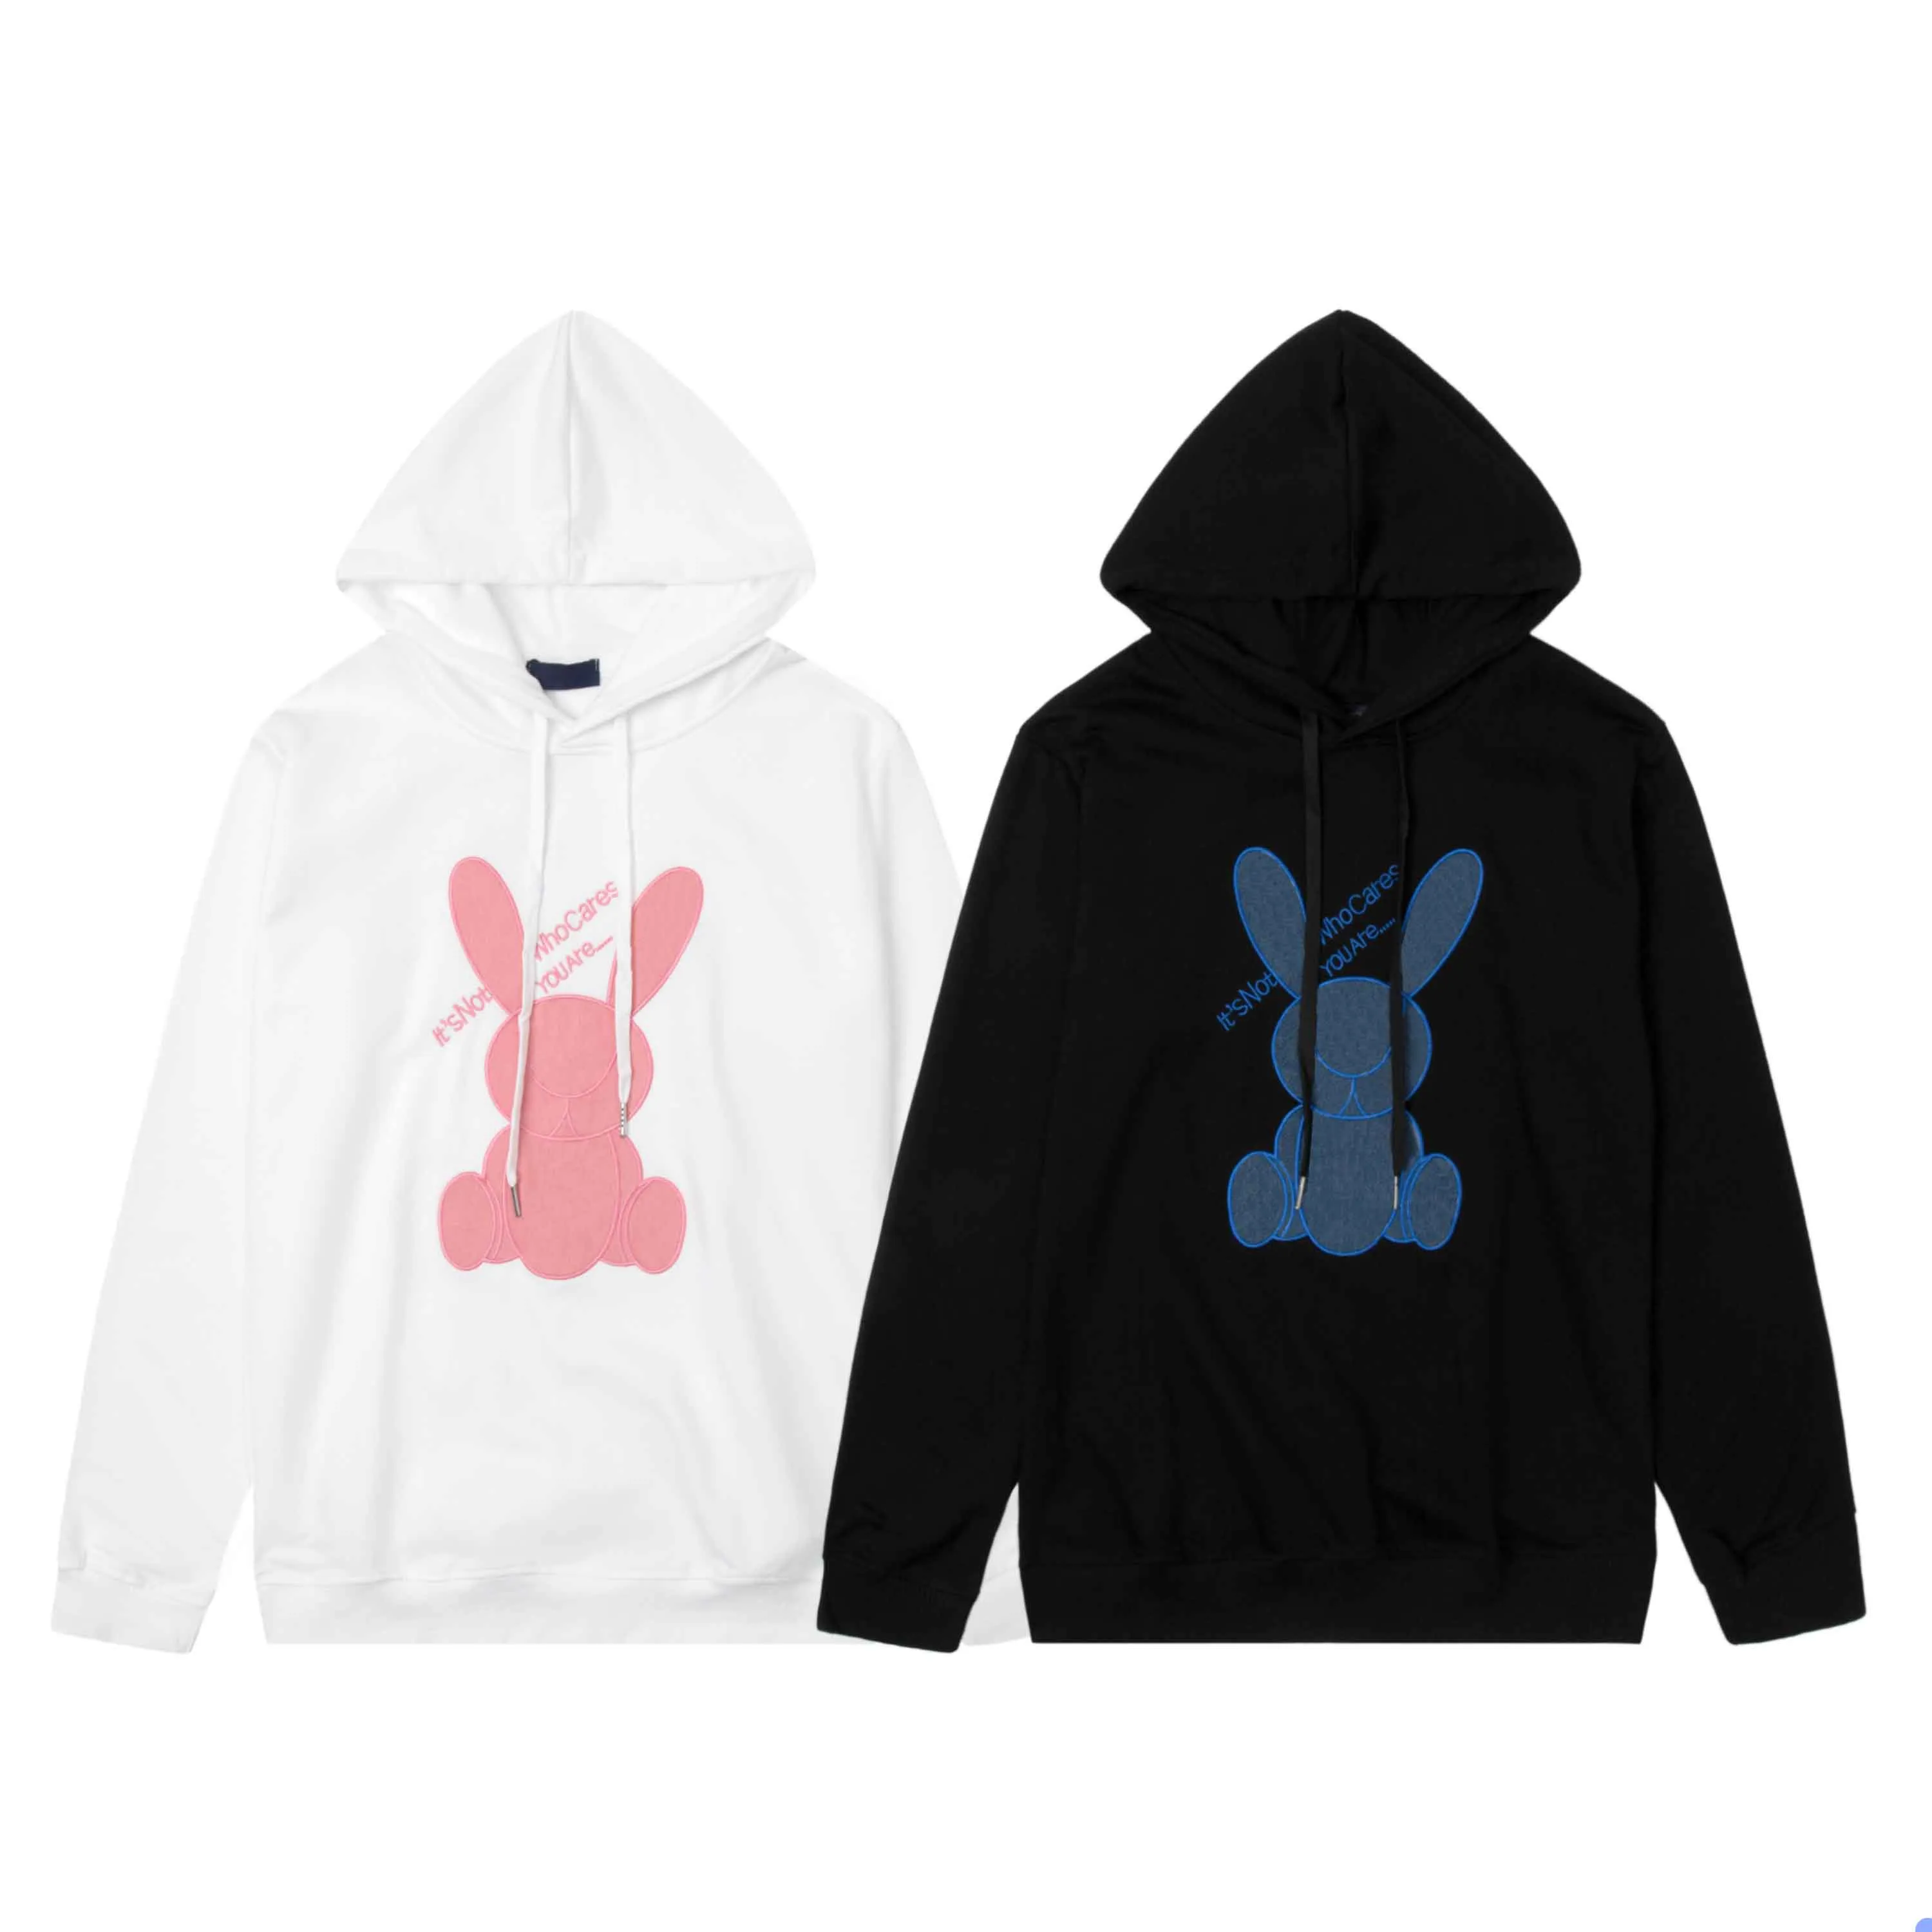 Womens Men Hoodies Fashion Rabbits Letters Print Winter Sweatshirts Women's Pullover Hoody Long Sleeve Natural Color Size M-2XL